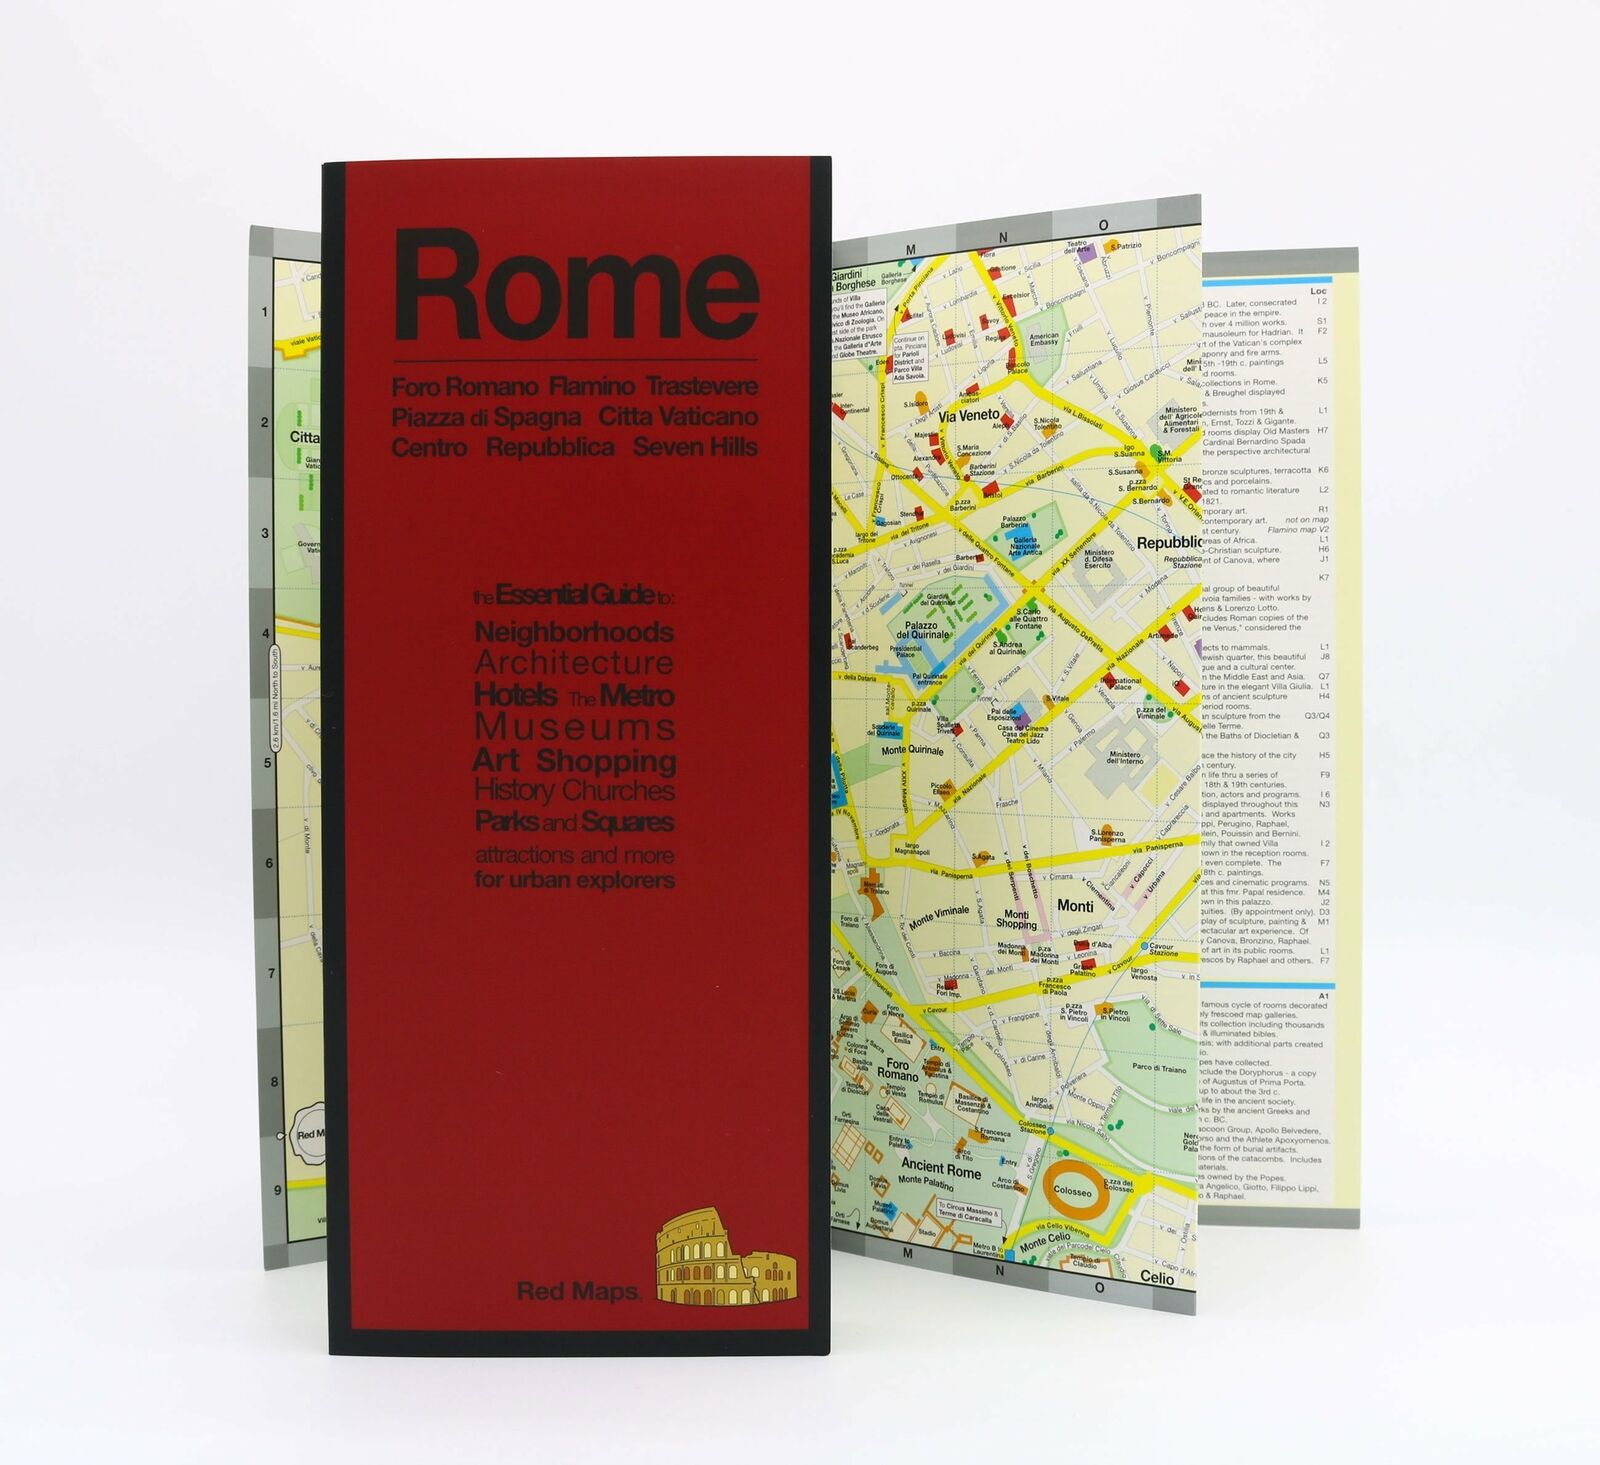 Red Maps Rome Current Edition - City Travel Guide